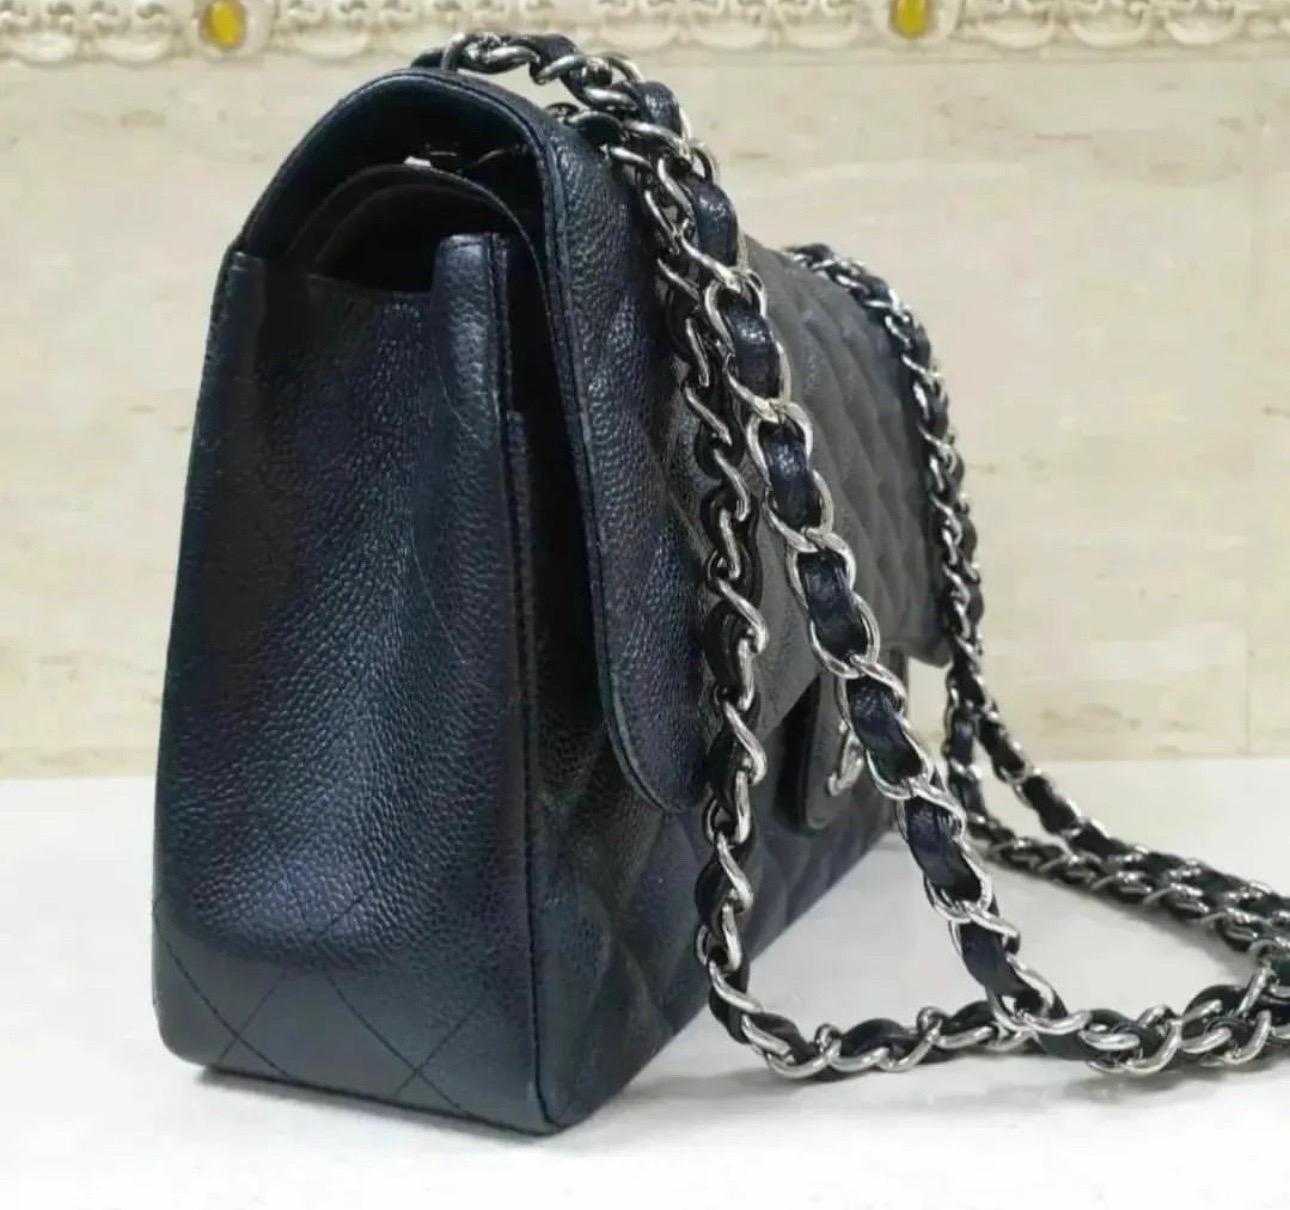  This bag is crafted from leather and features a gold turnlock CC closure and a double flap top.
The multi-functional chain strap may be worn on the shoulder or lengthened for a longer drop. 
A classic and beautiful addition to any collection.
Comes